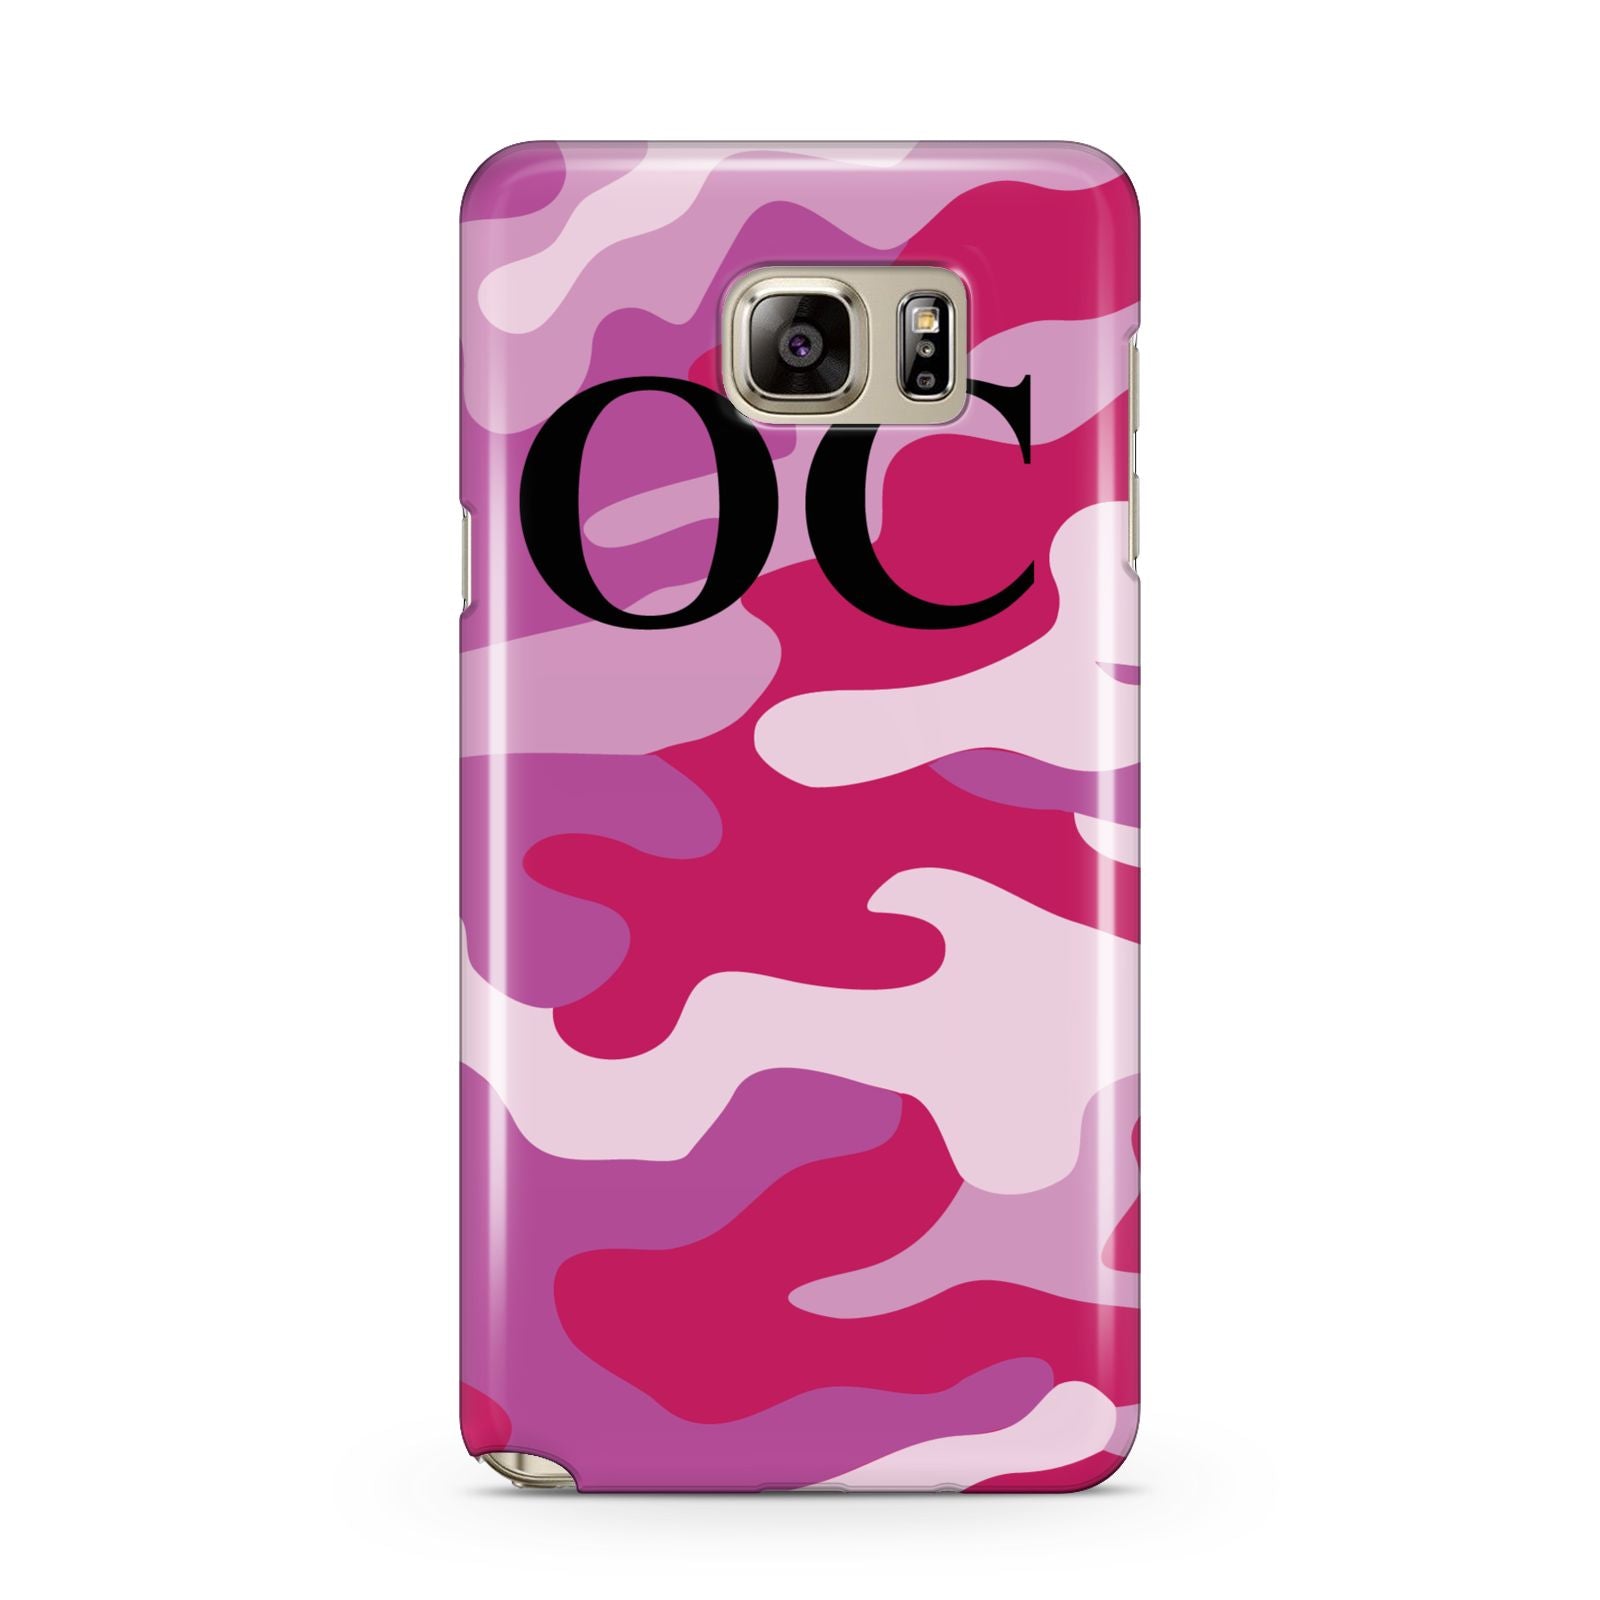 Camouflage Personalised Samsung Galaxy Note 5 Case